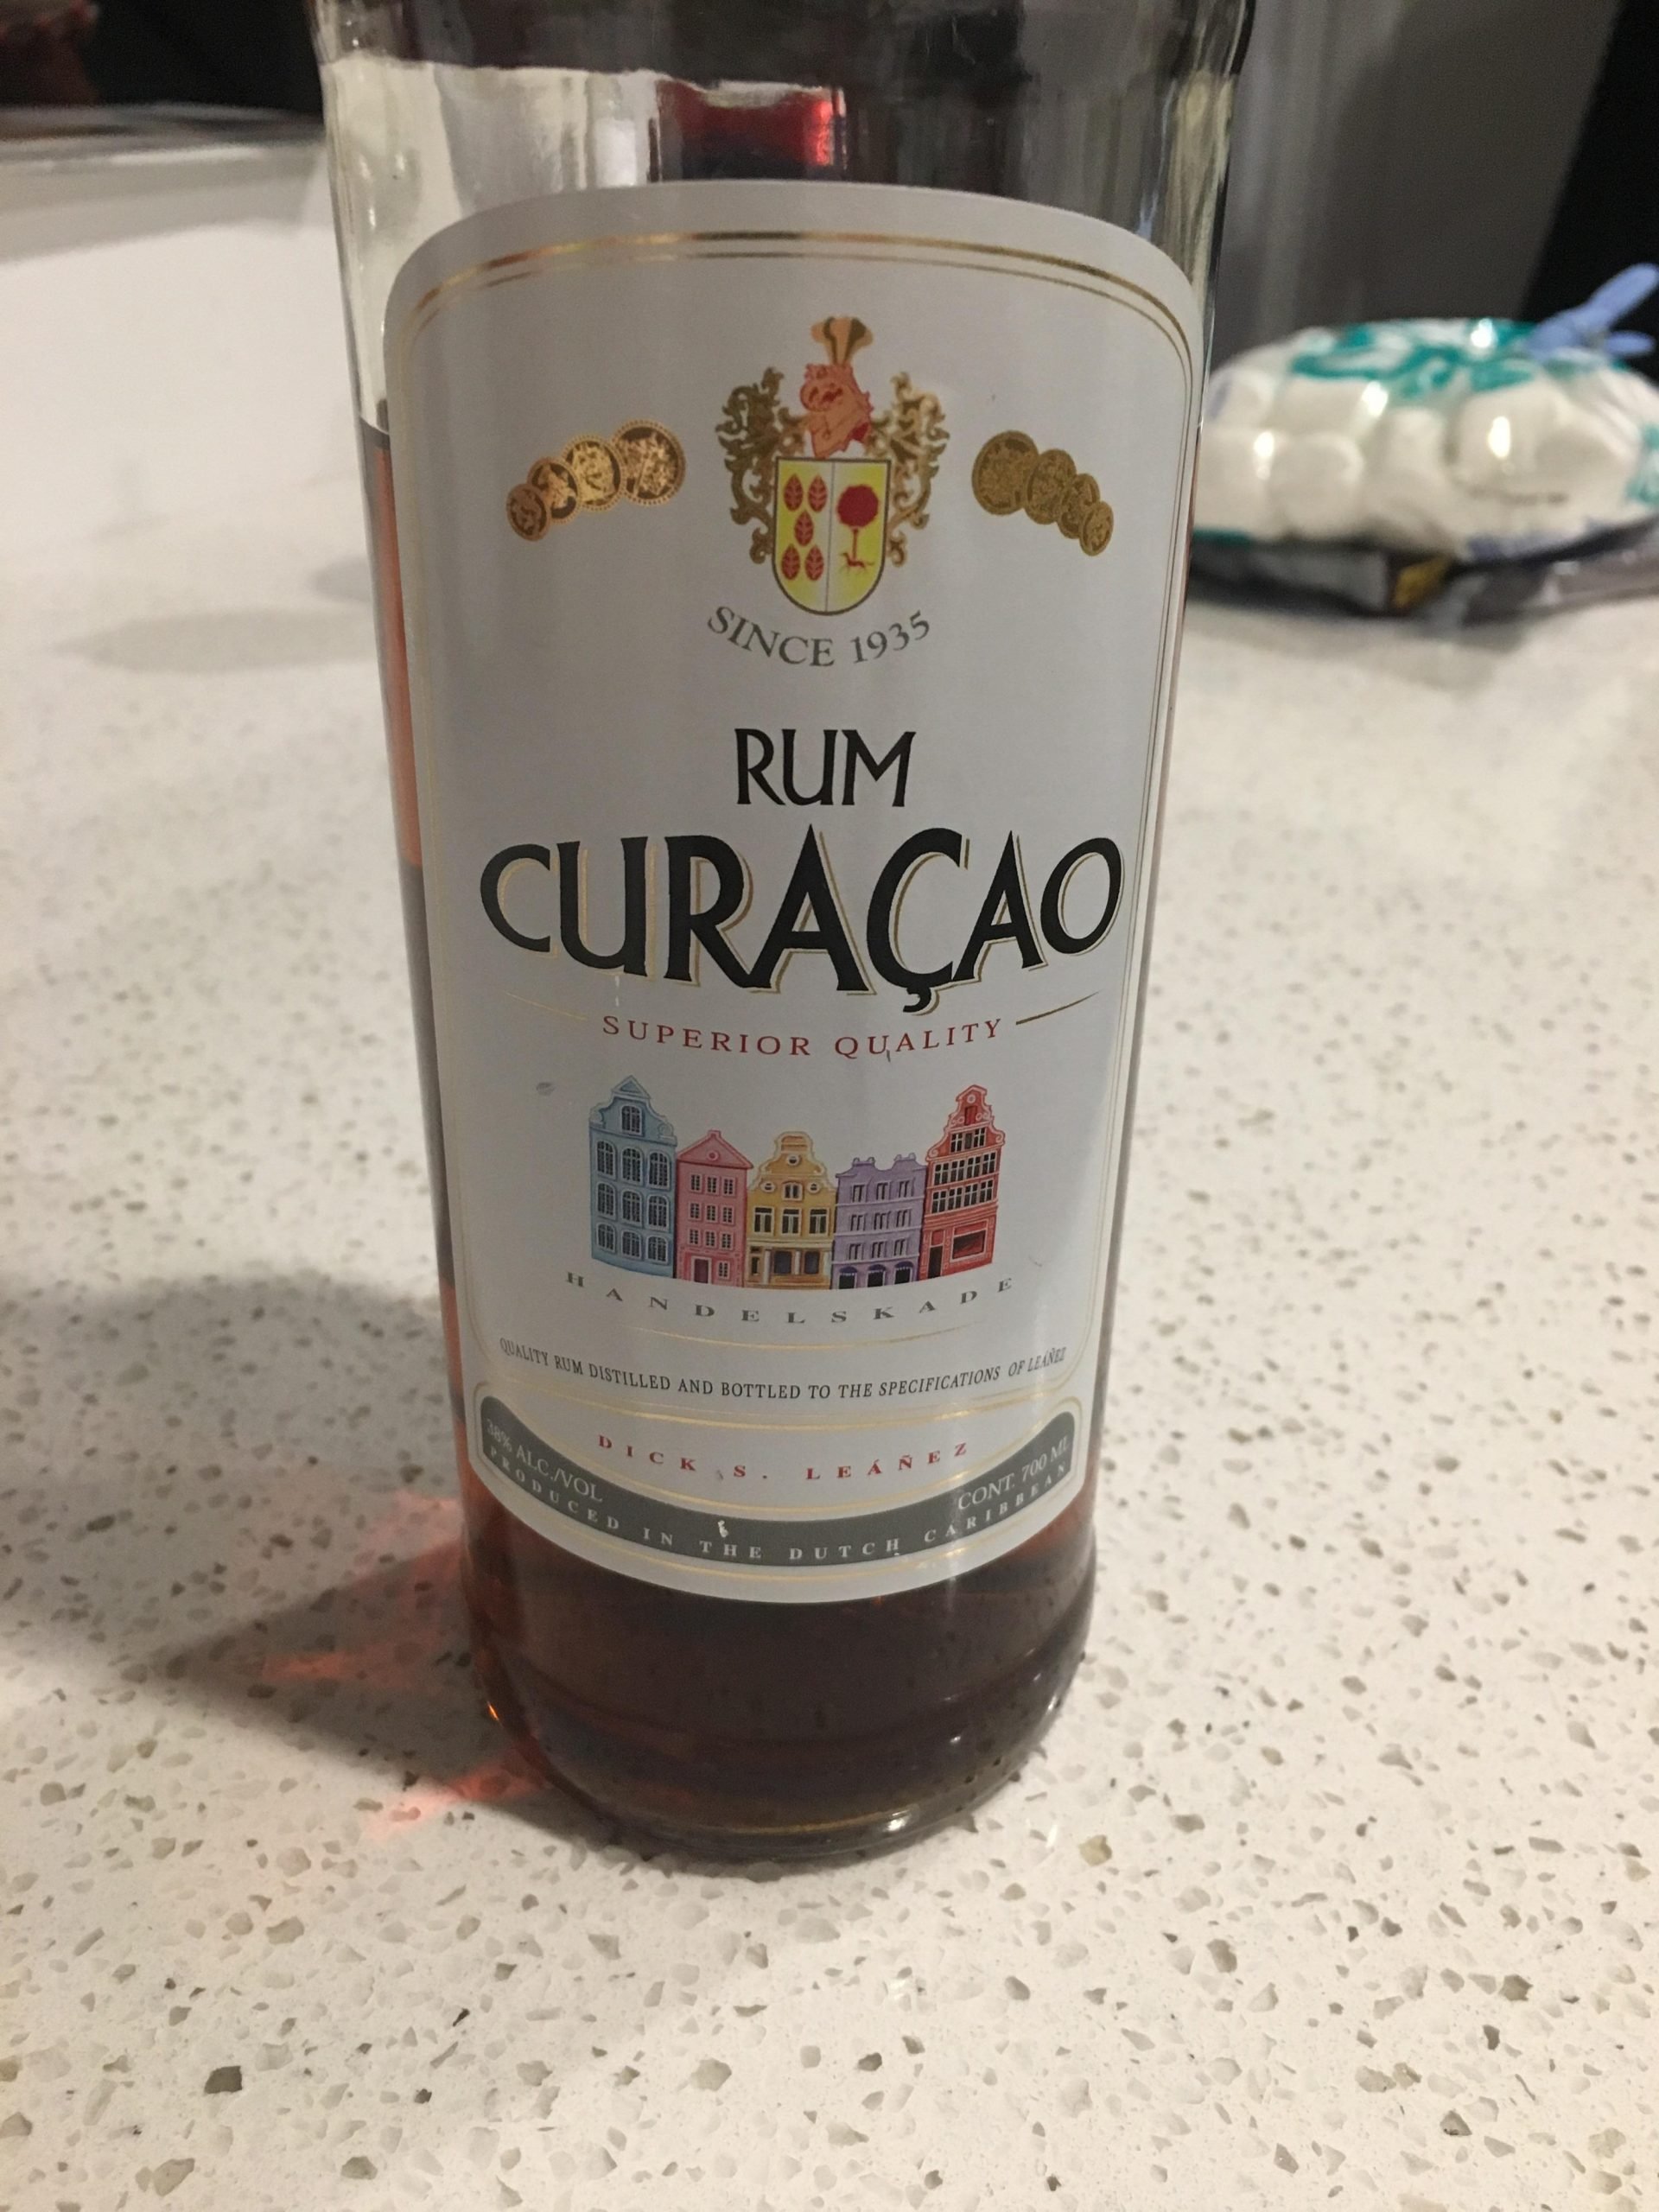 Where can I buy more of this Curaçao Rum? : rum